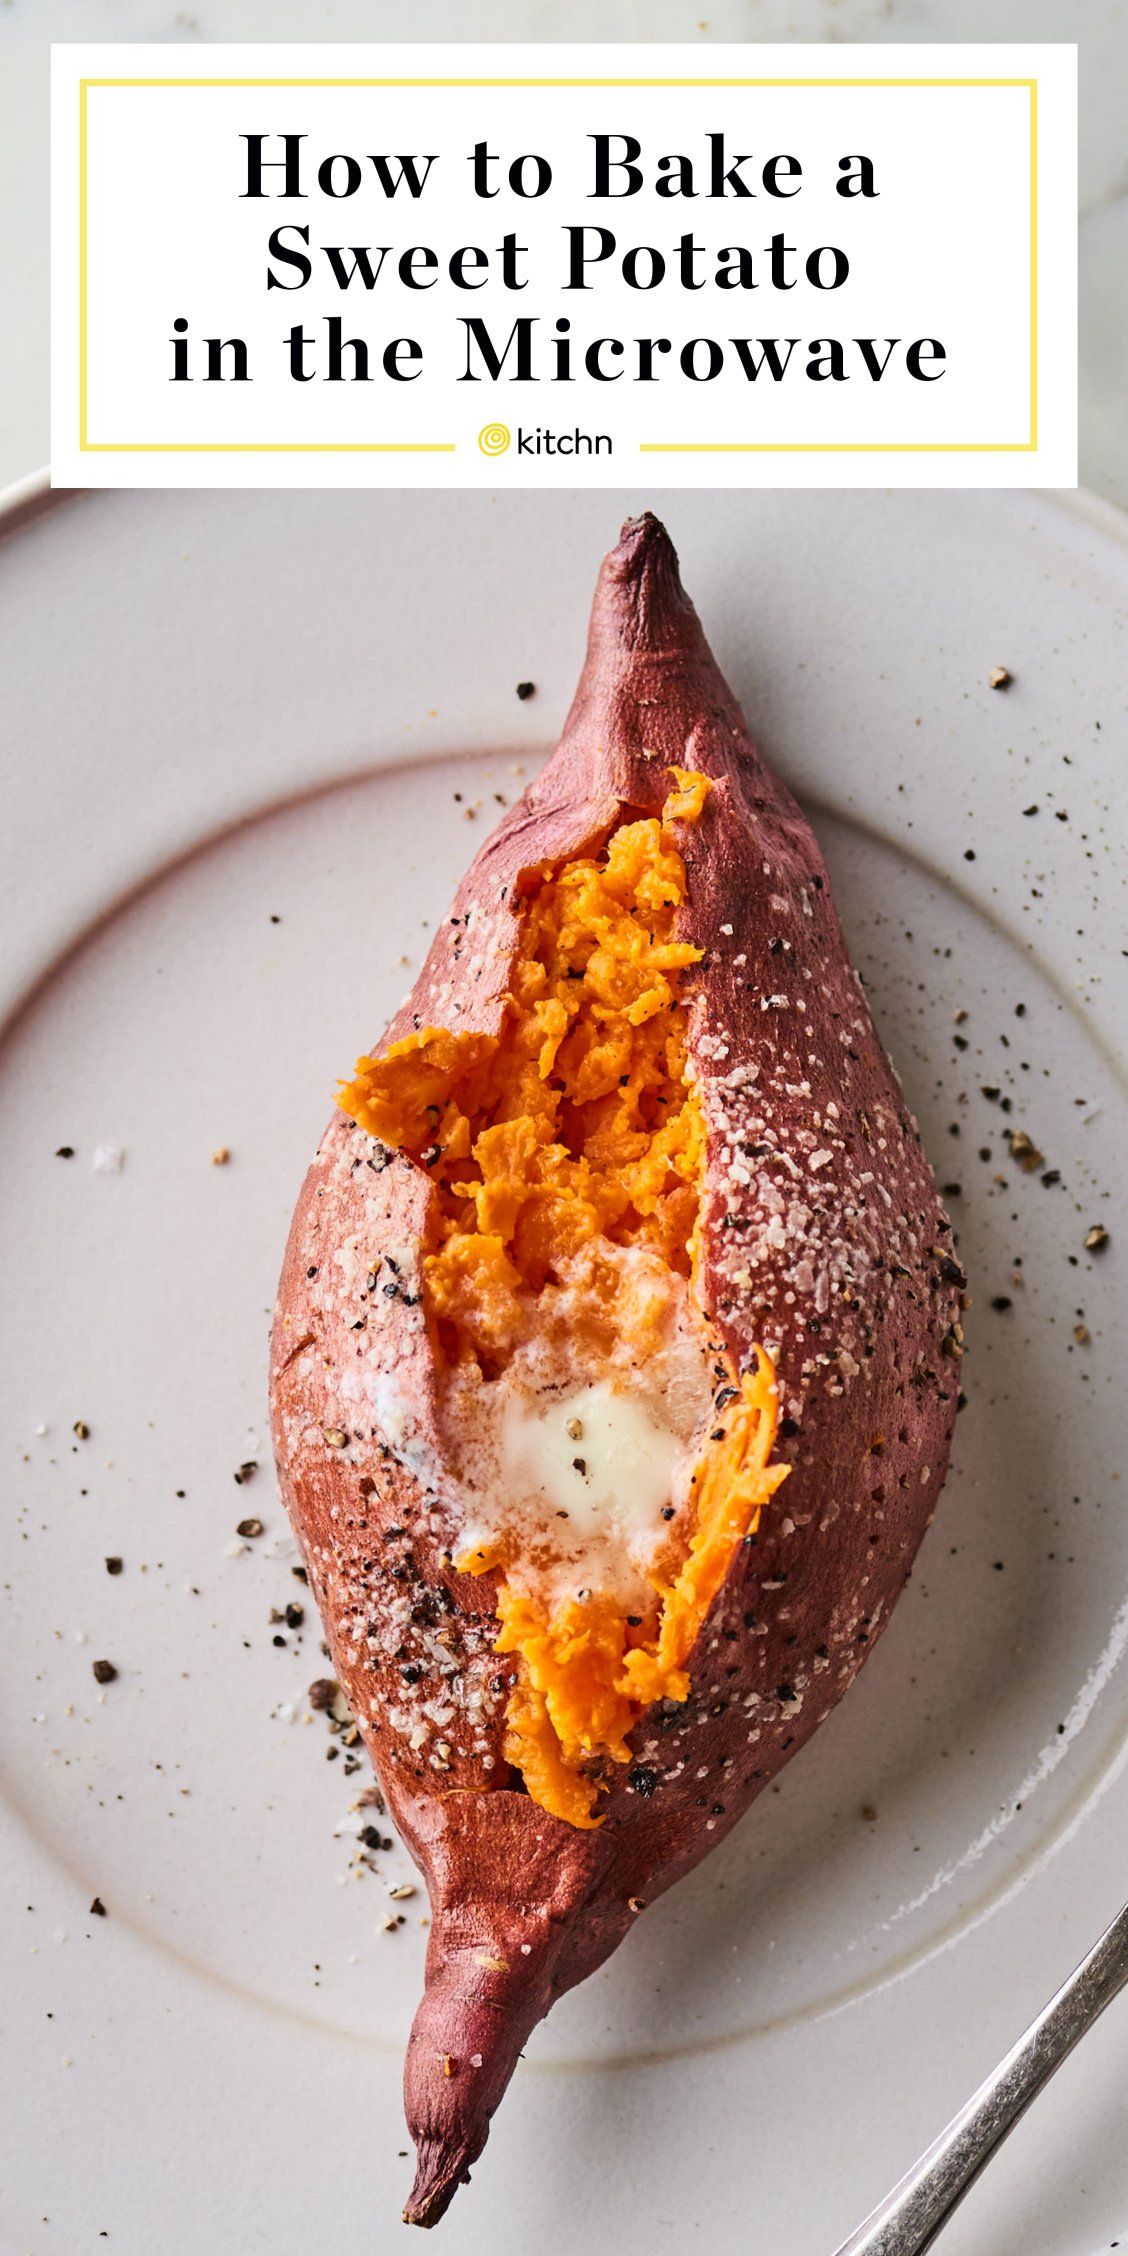 What Is The Best Way To Cook A Sweet Potato In The Microwave